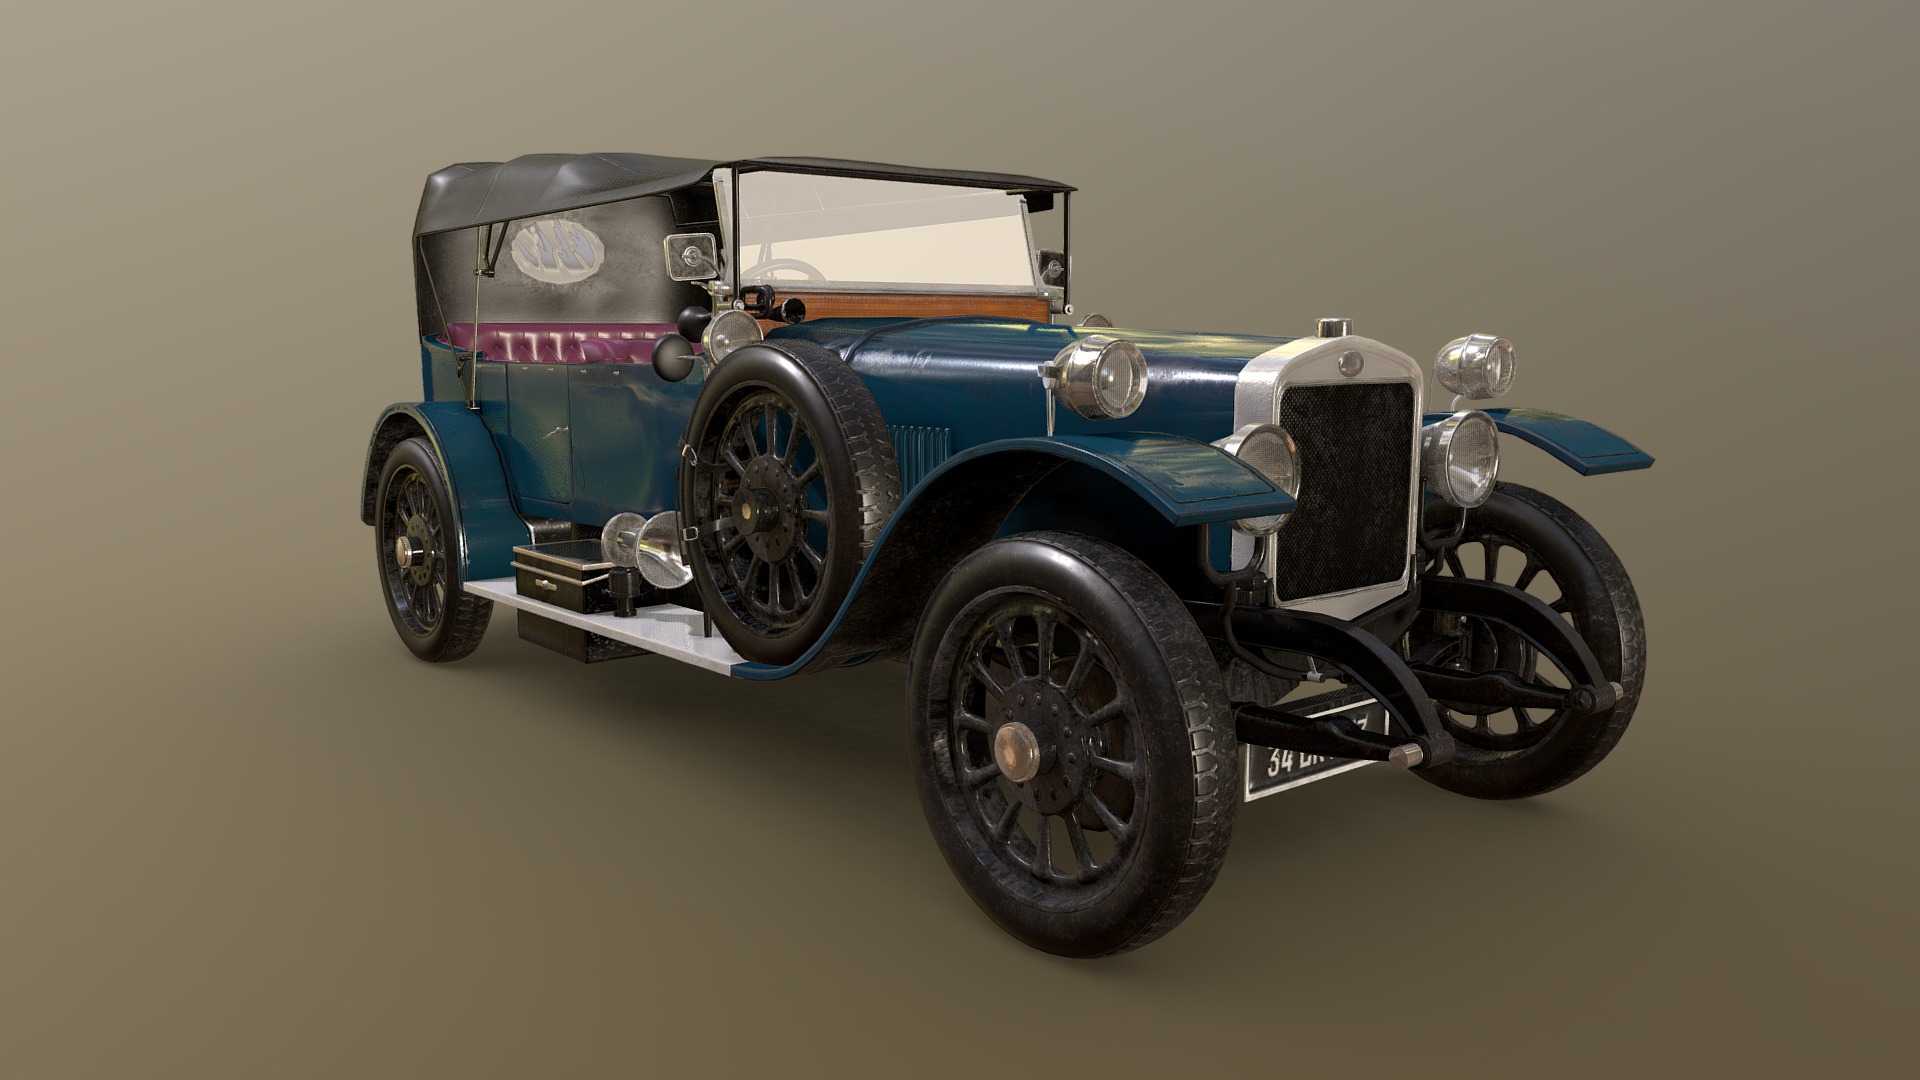 Our studio's recent work done for Leartes Studios. The model is inteneded for both Unreal Engine and Unity 3D.
This is a 1919 Sunbeam model featured in film Casablanca. The color of the vehicle is changed, but the design is almost alike 3d model